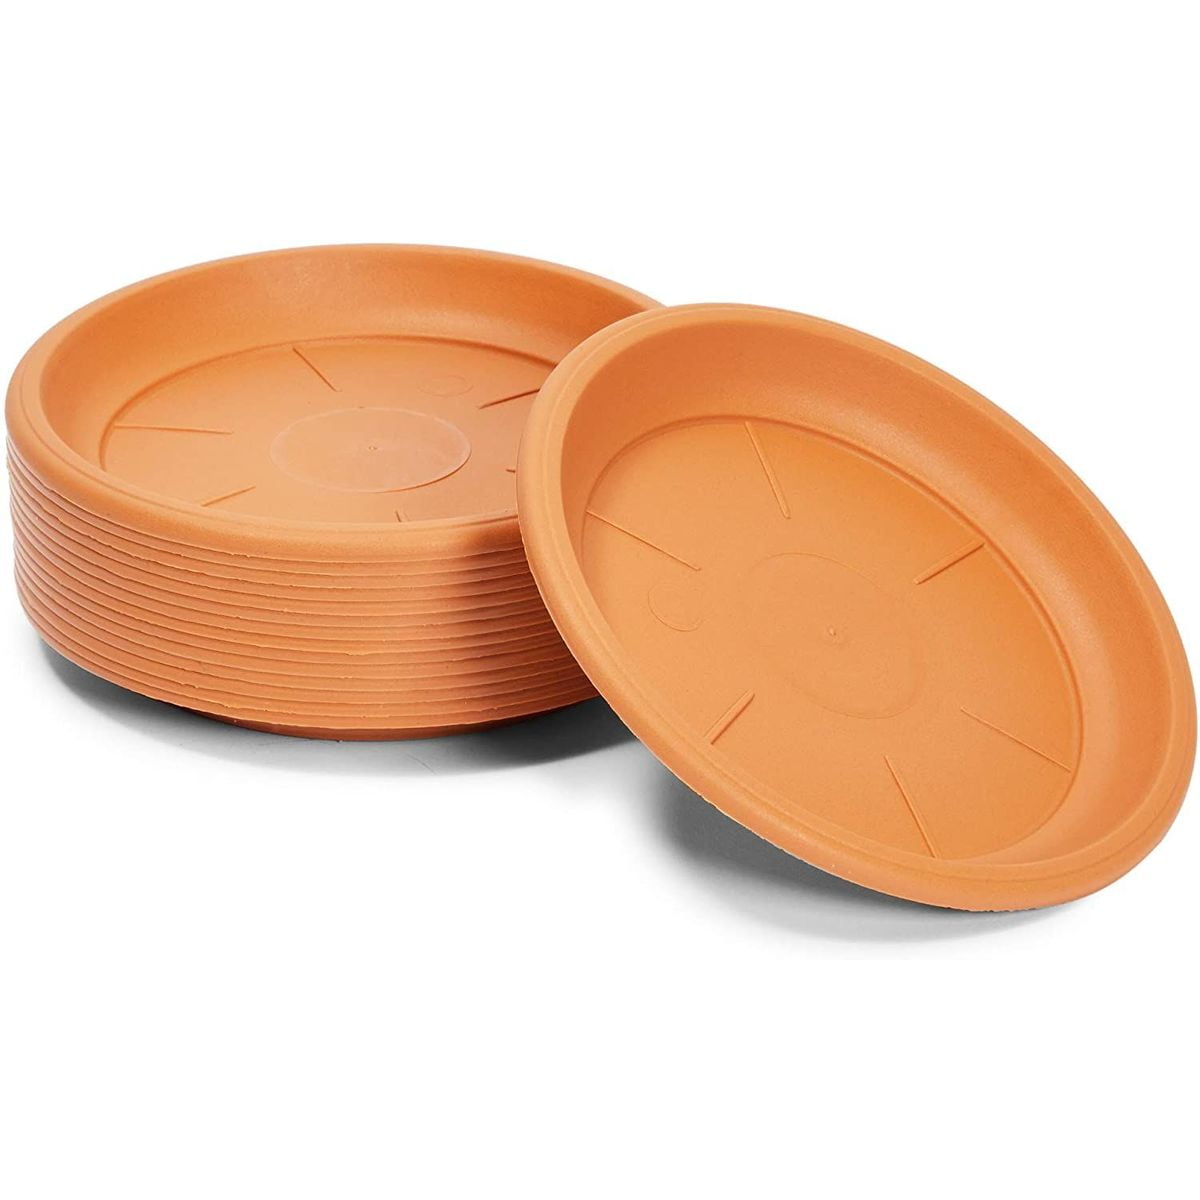 Details about   30 x 21cm Plant Pot Saucer Drip Tray Terracotta Plastic Deep High Sided Strong 